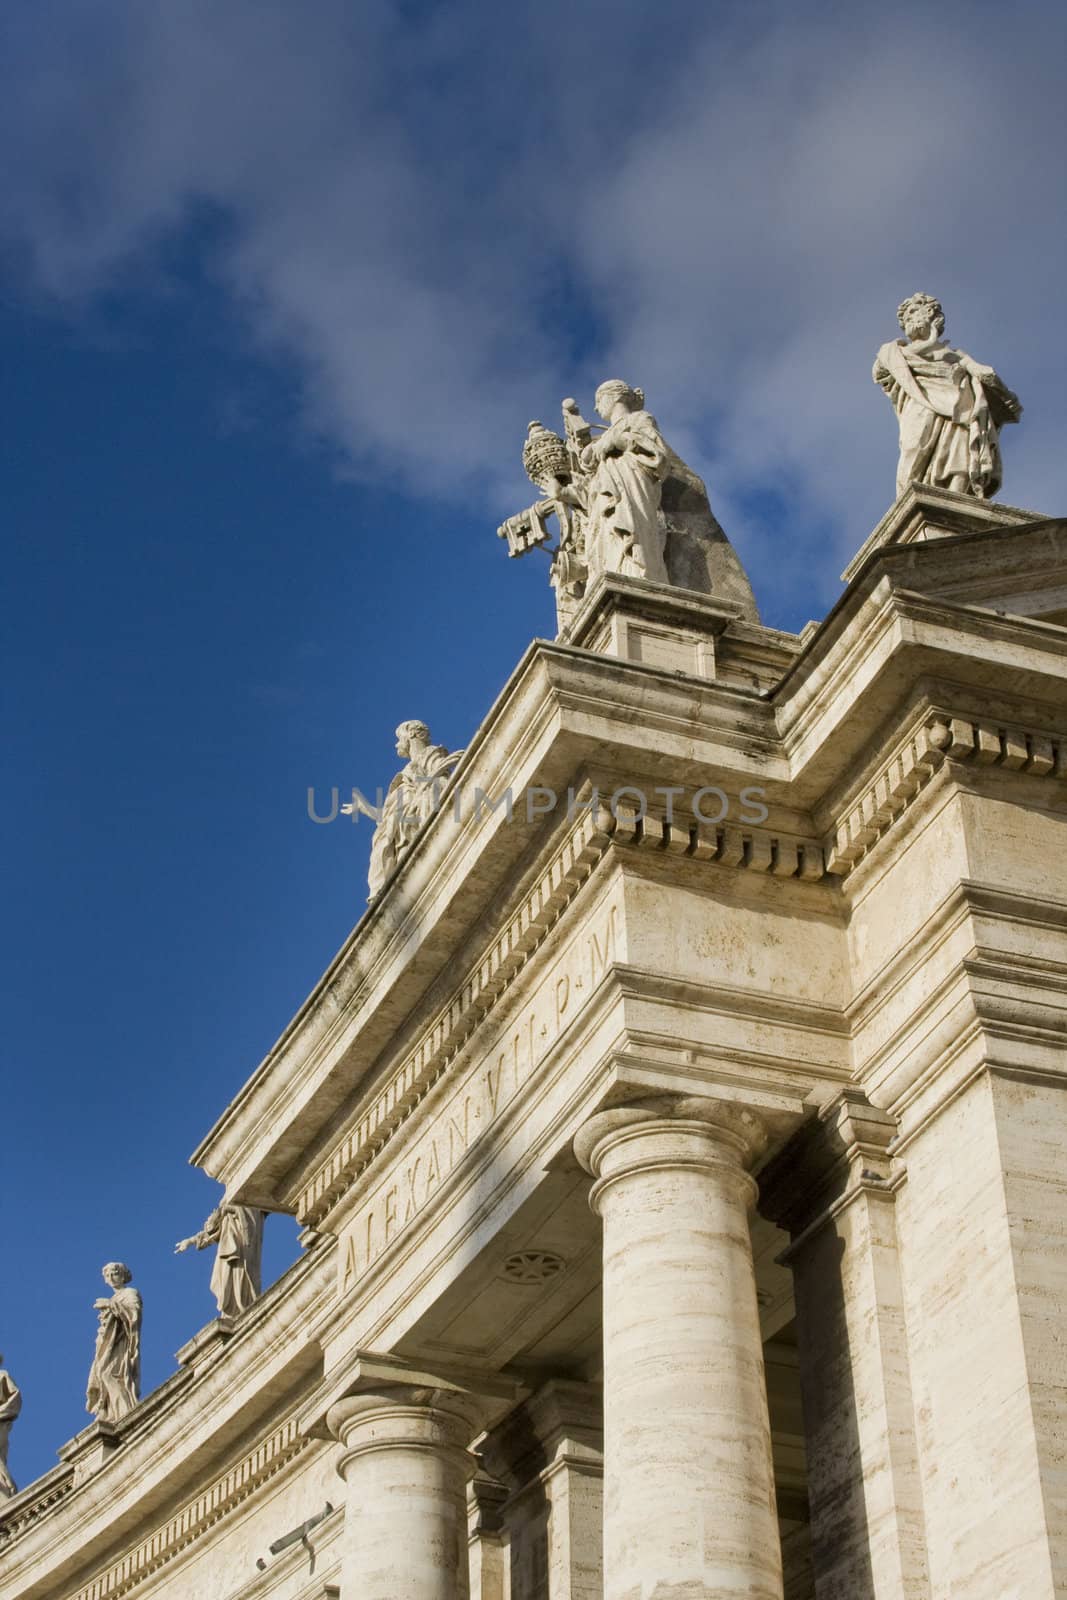 Statues on buildings in the Vatican